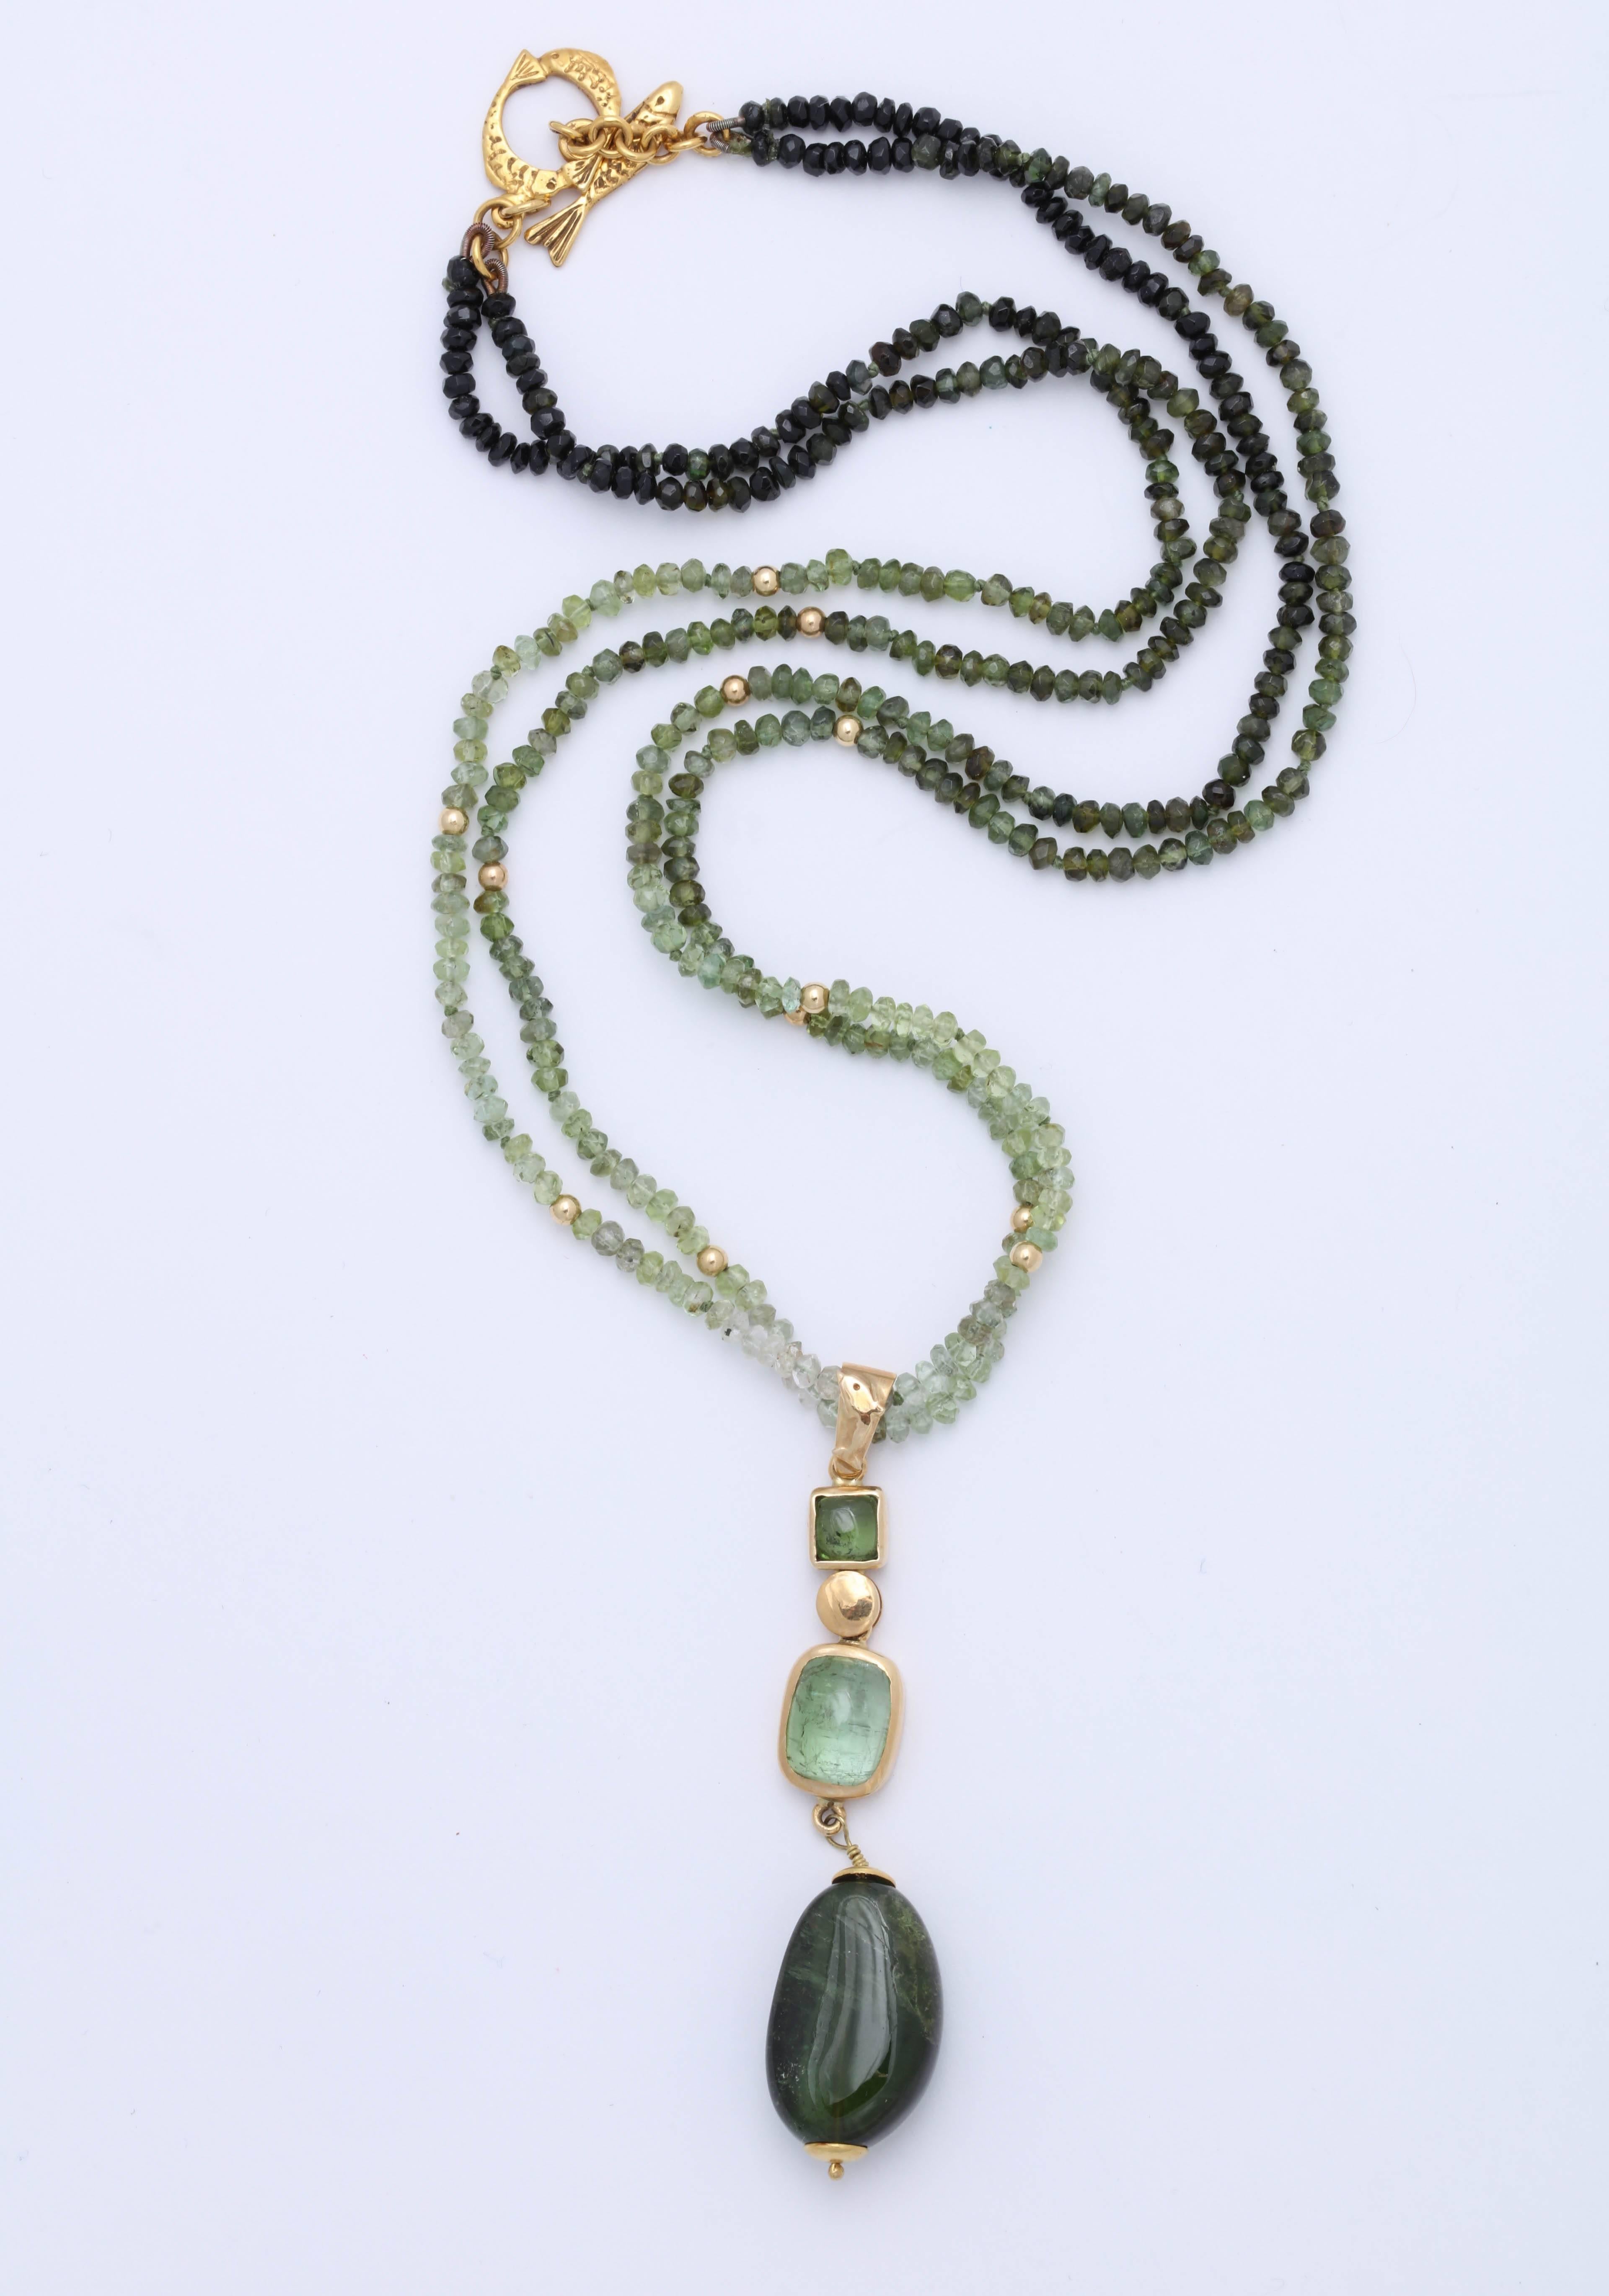 These beautiful ombre shaded green tourmaline beads suspend a 3 part pendant with square and rectangular cabochon cut green tourmalines in gold bezel settings. The bail is enhanced with a lovely gold dolphin. The necklace is finished with a toggle